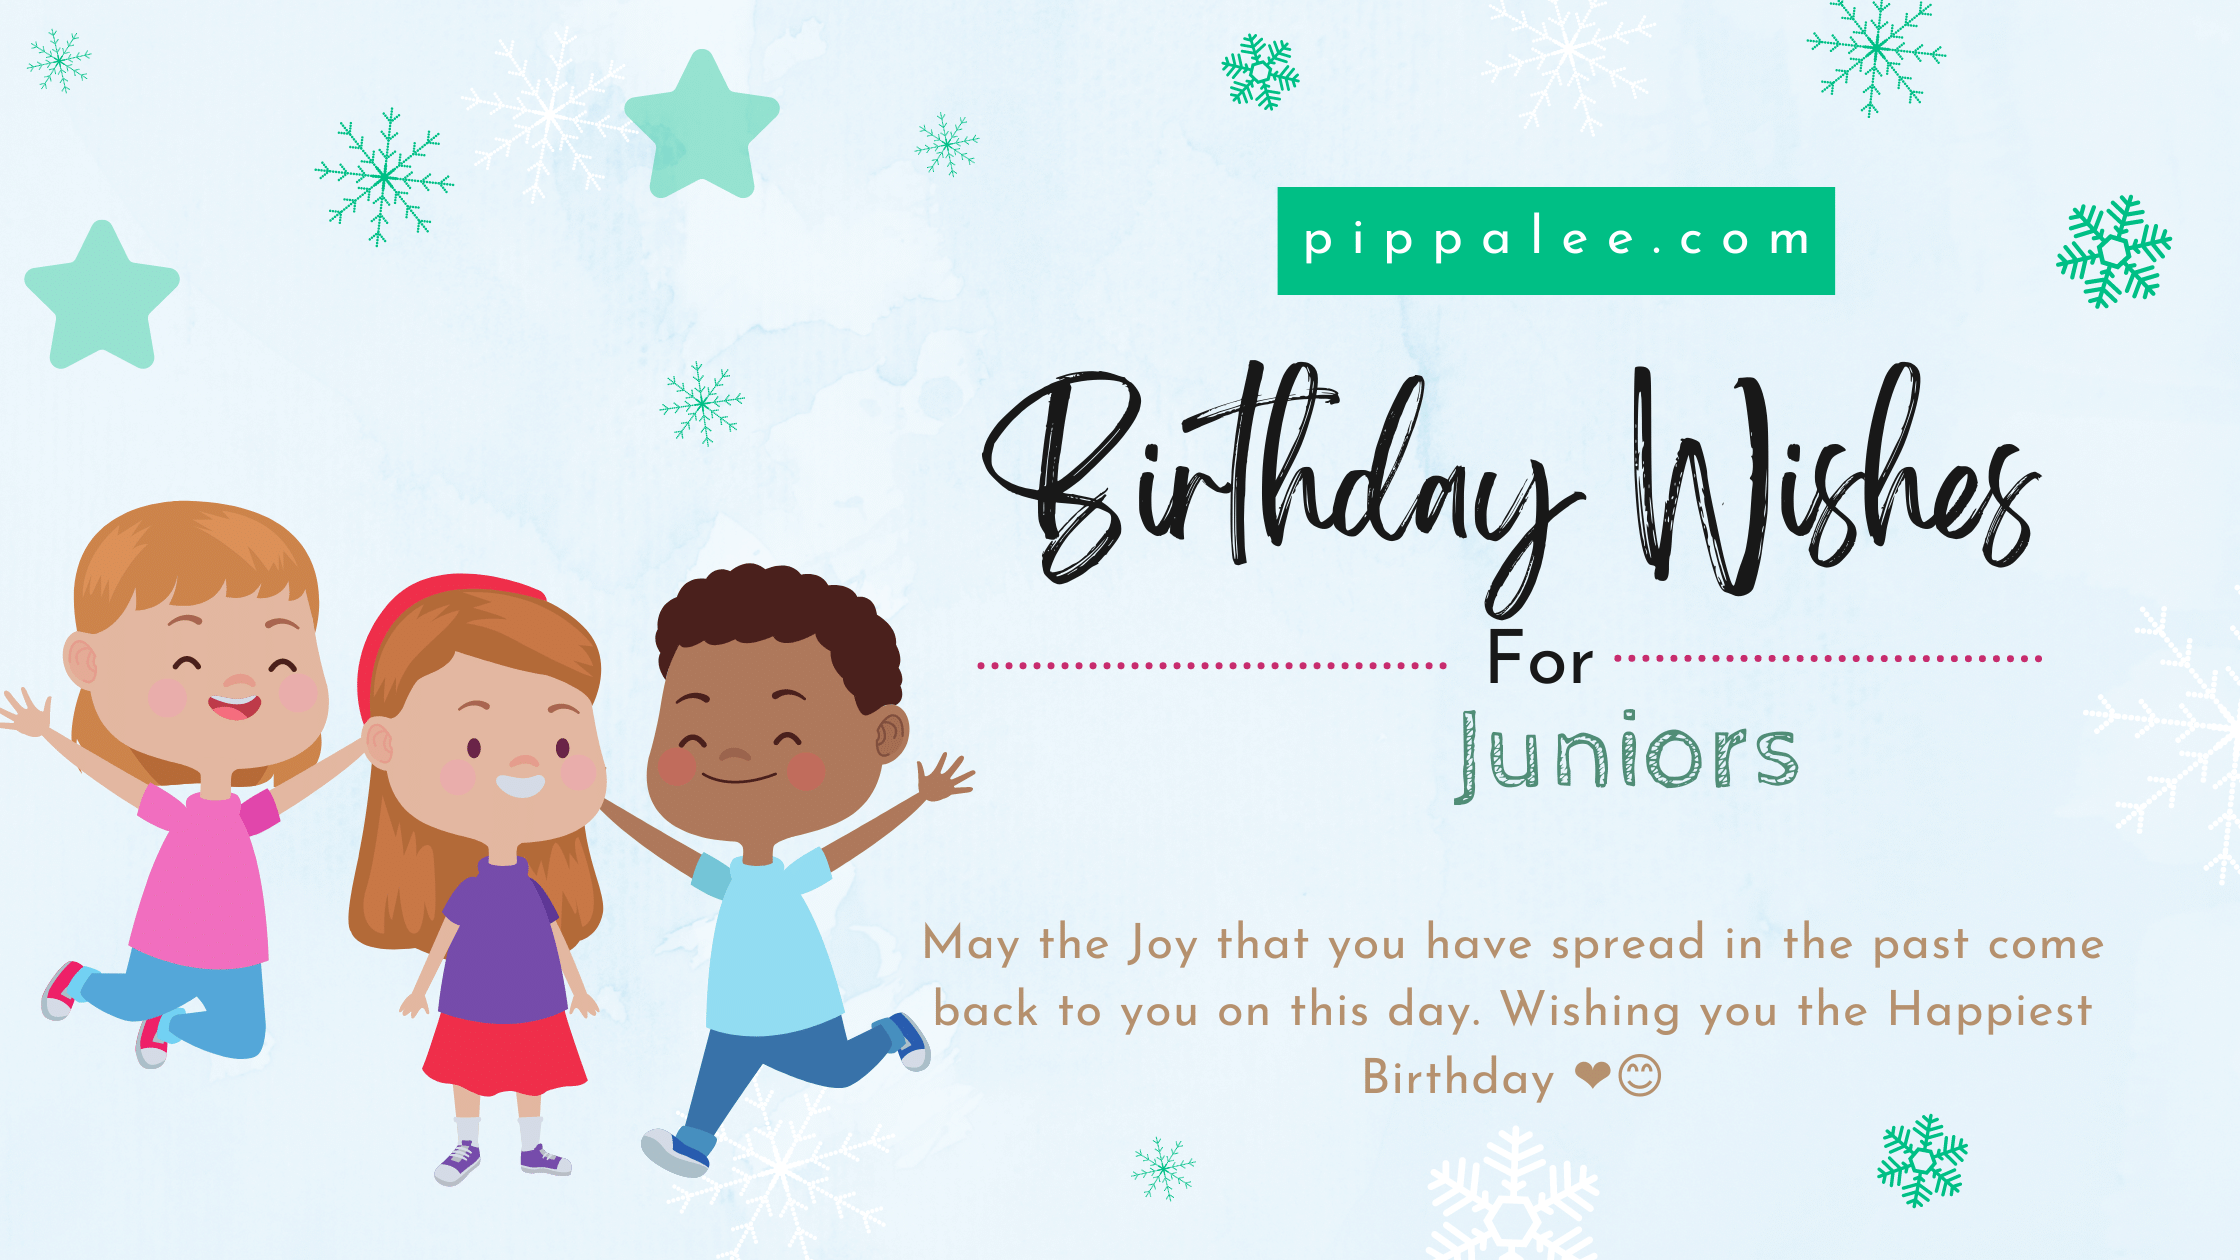 Birthday Wishes For Juniors - Wishes & Messages